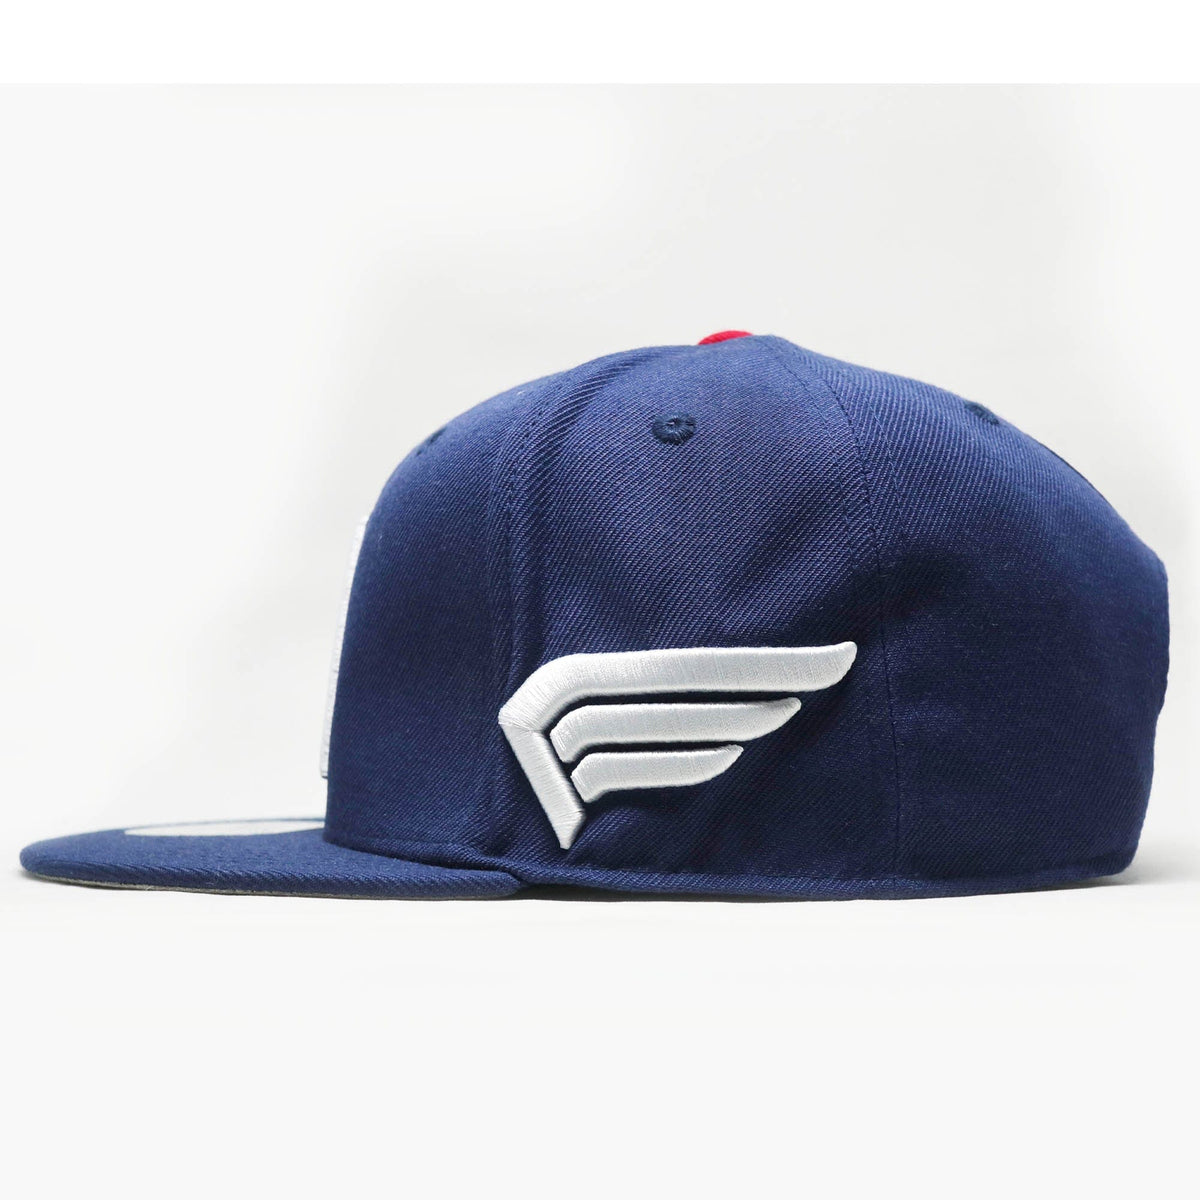 Super Soldier (Imperfection Discounted) - Snapback